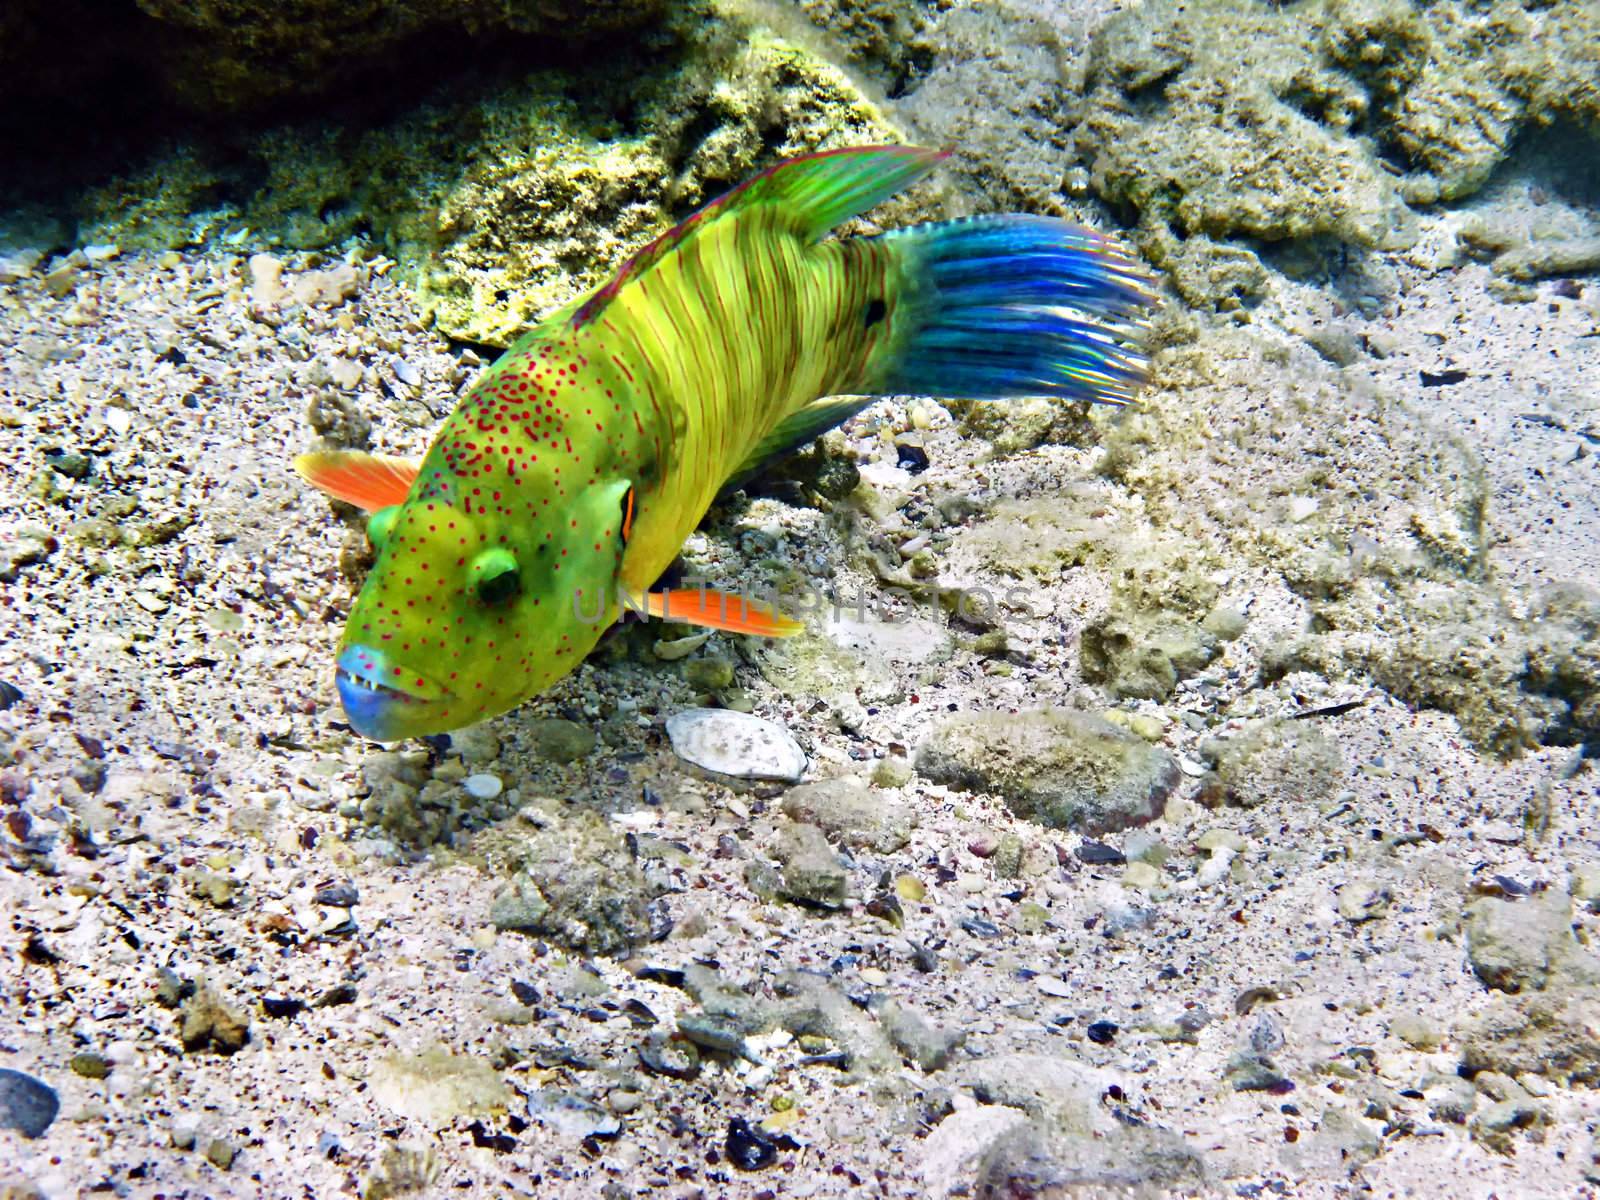 Broomtail wrasse female by vintrom